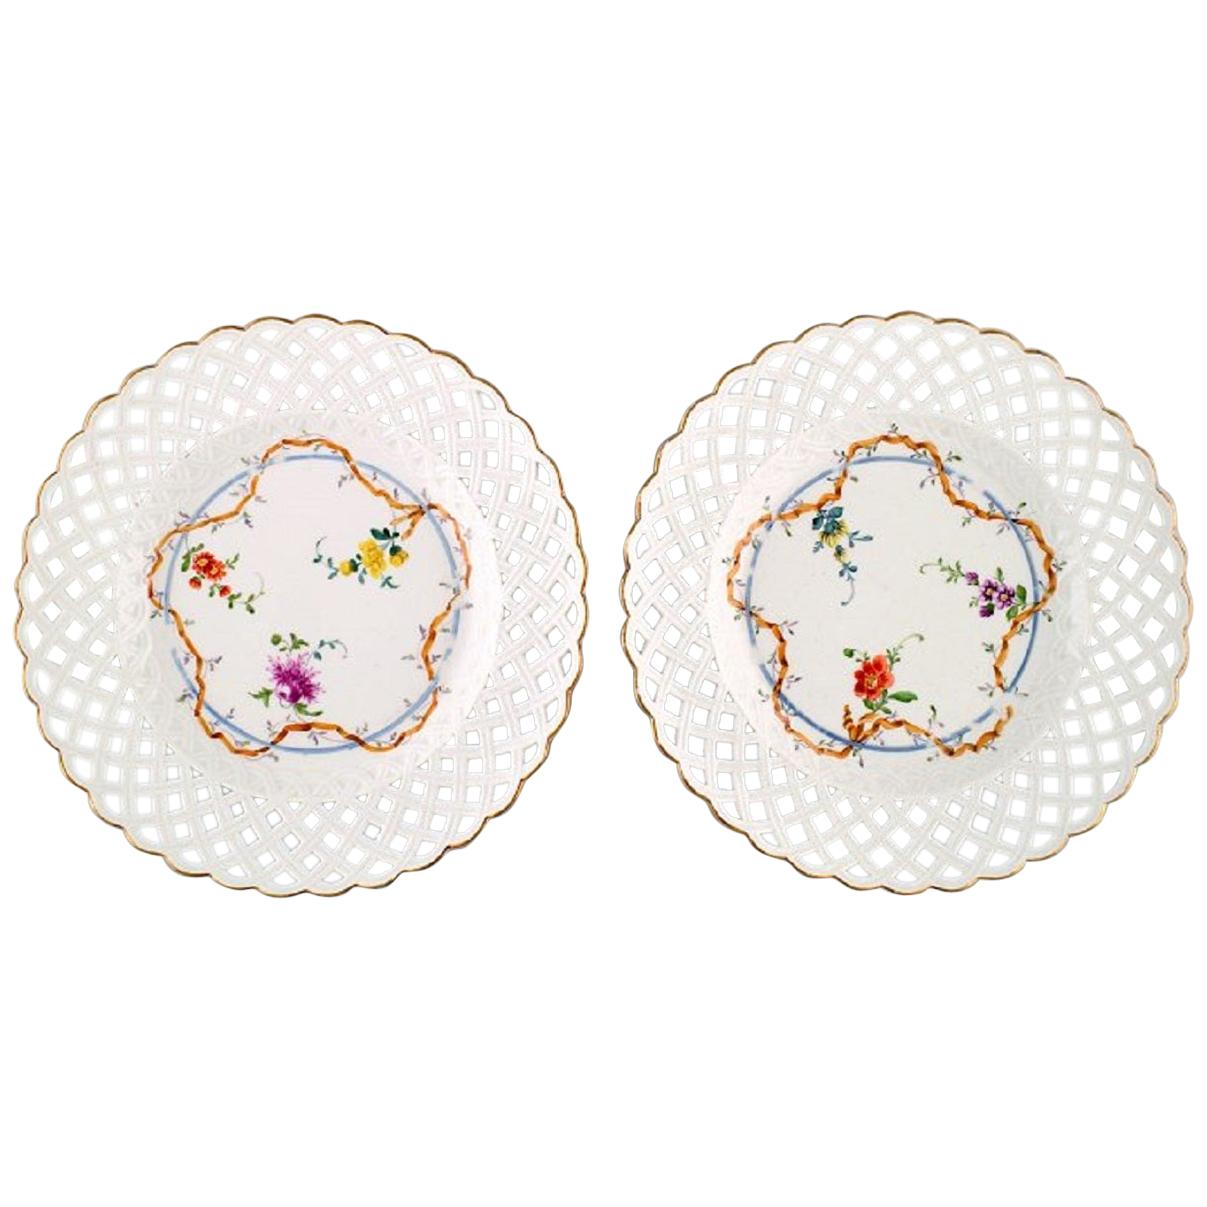 Two Antique Meissen Plates in Pierced Porcelain with Hand Painted Floral Motifs